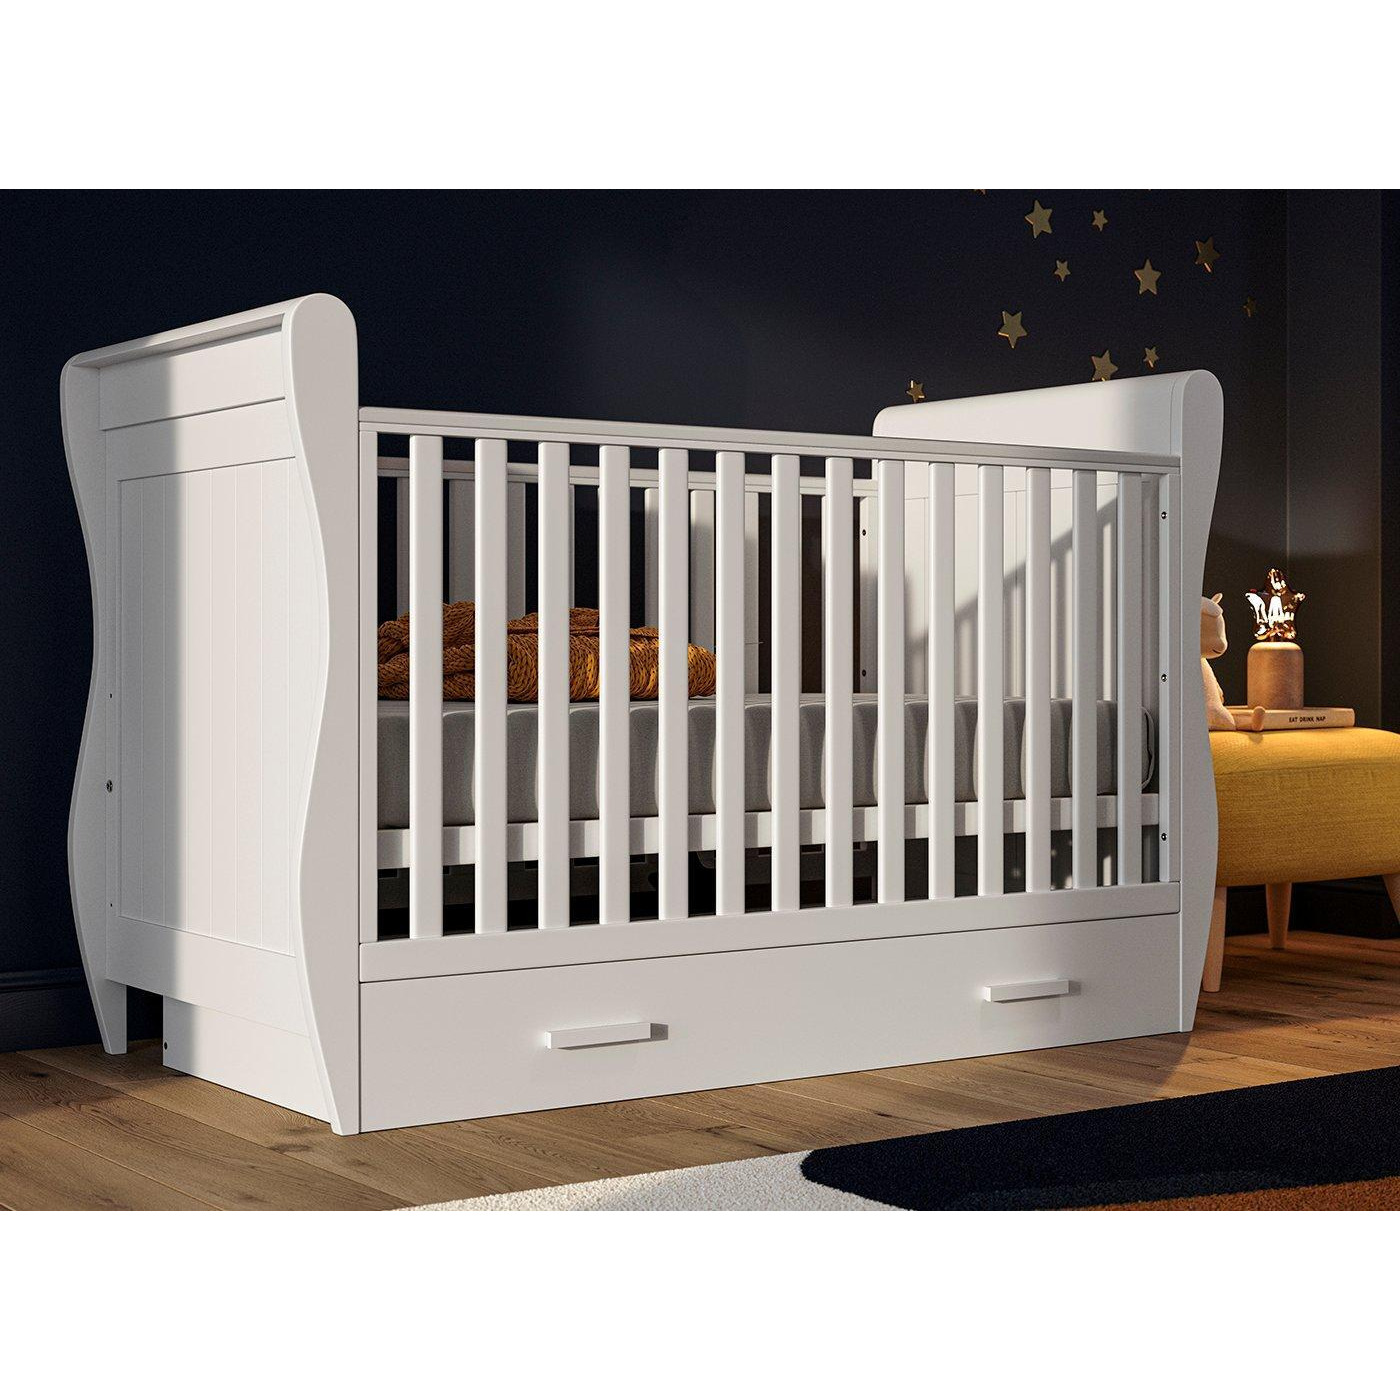 Dreams Sleigh Cot Bed - White